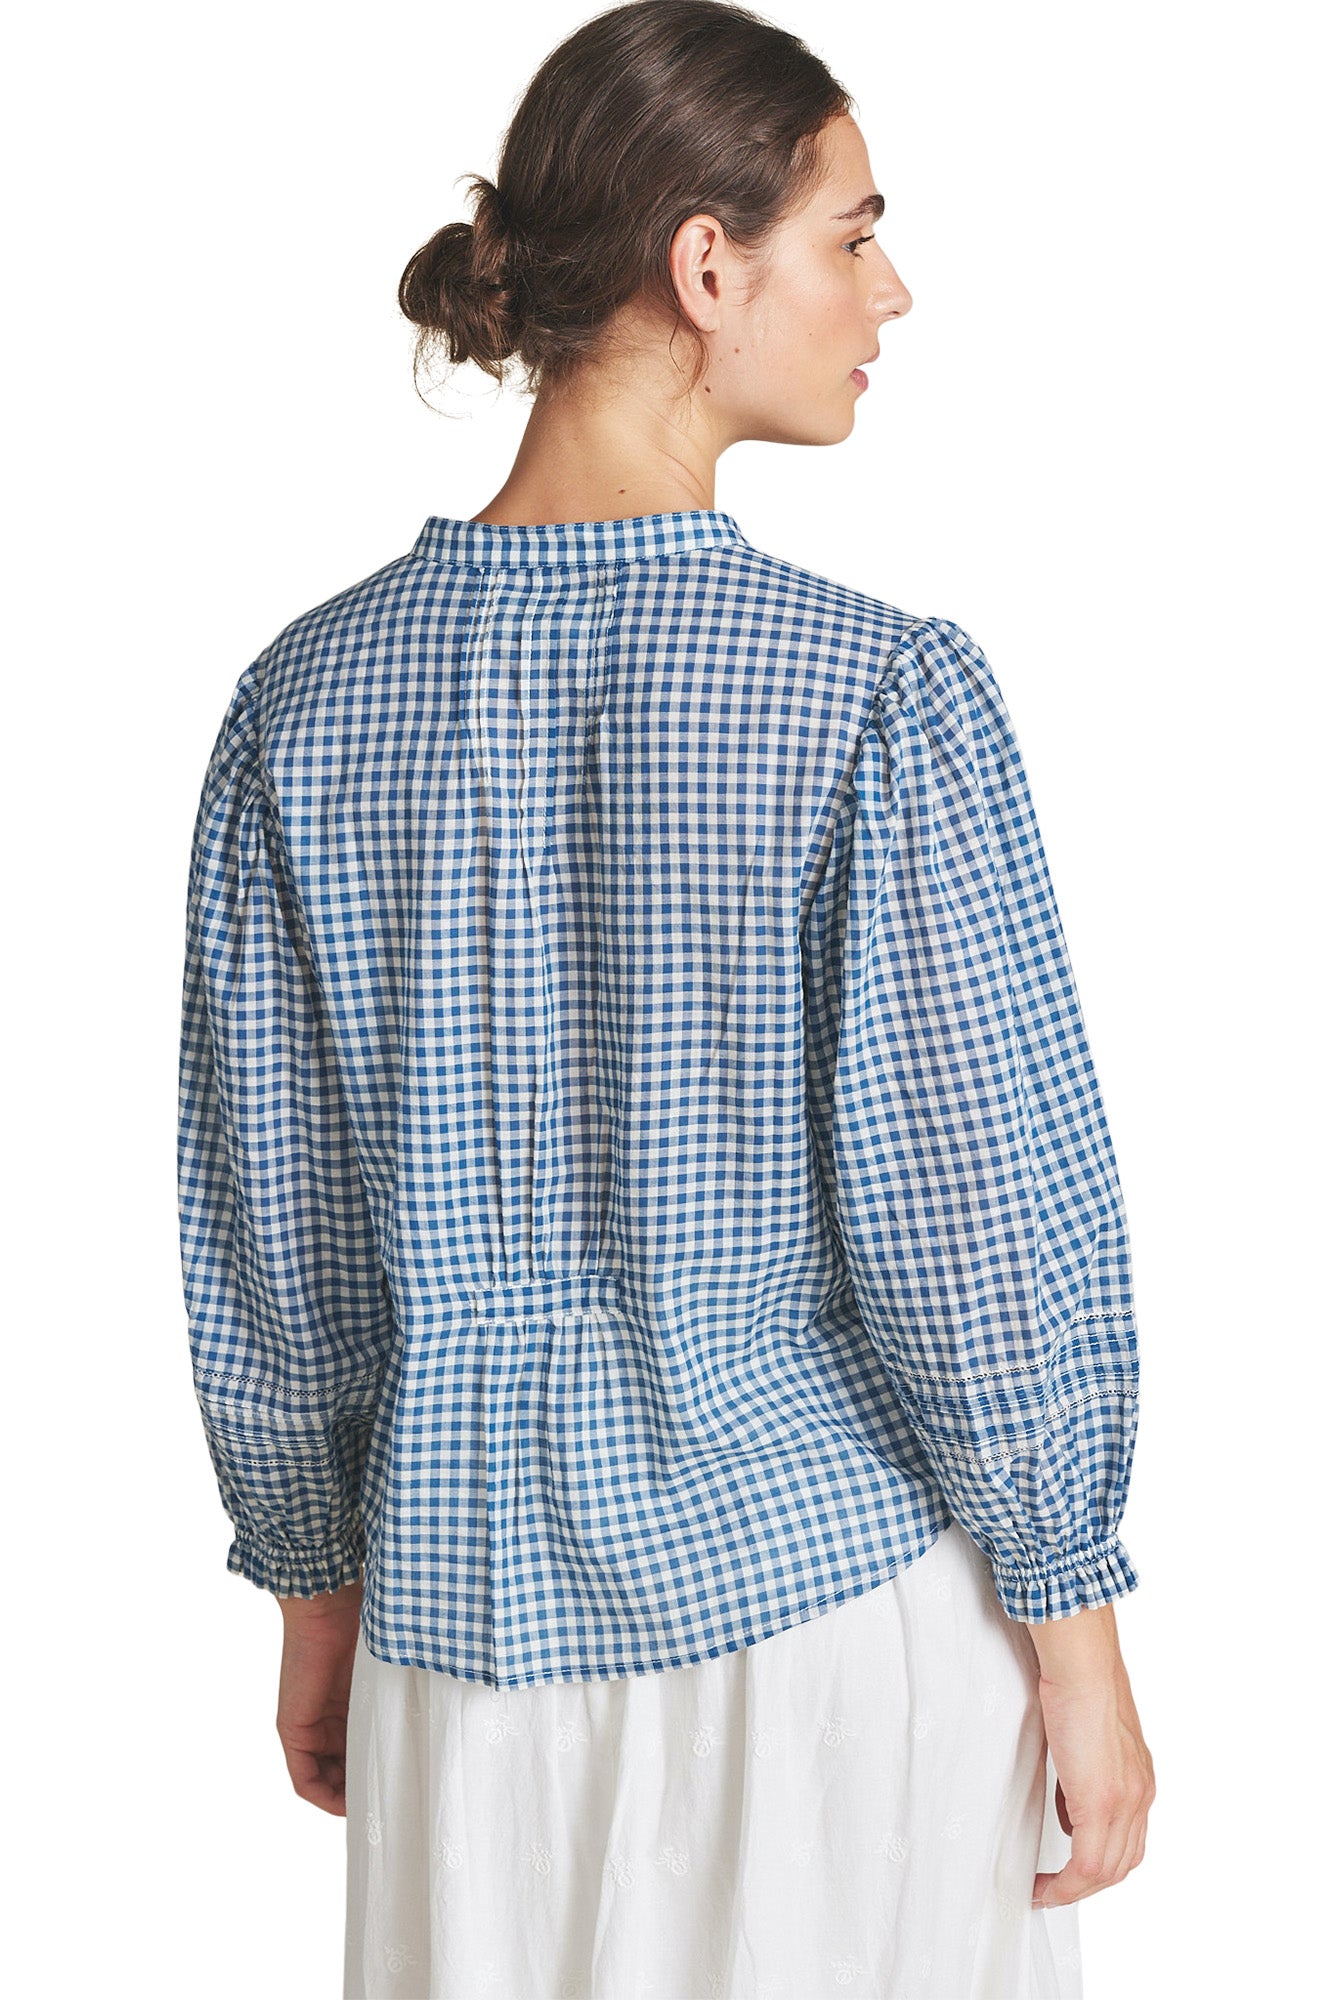 Trovata Birds of Paradis Maeve Blouse in Sailor Gingham